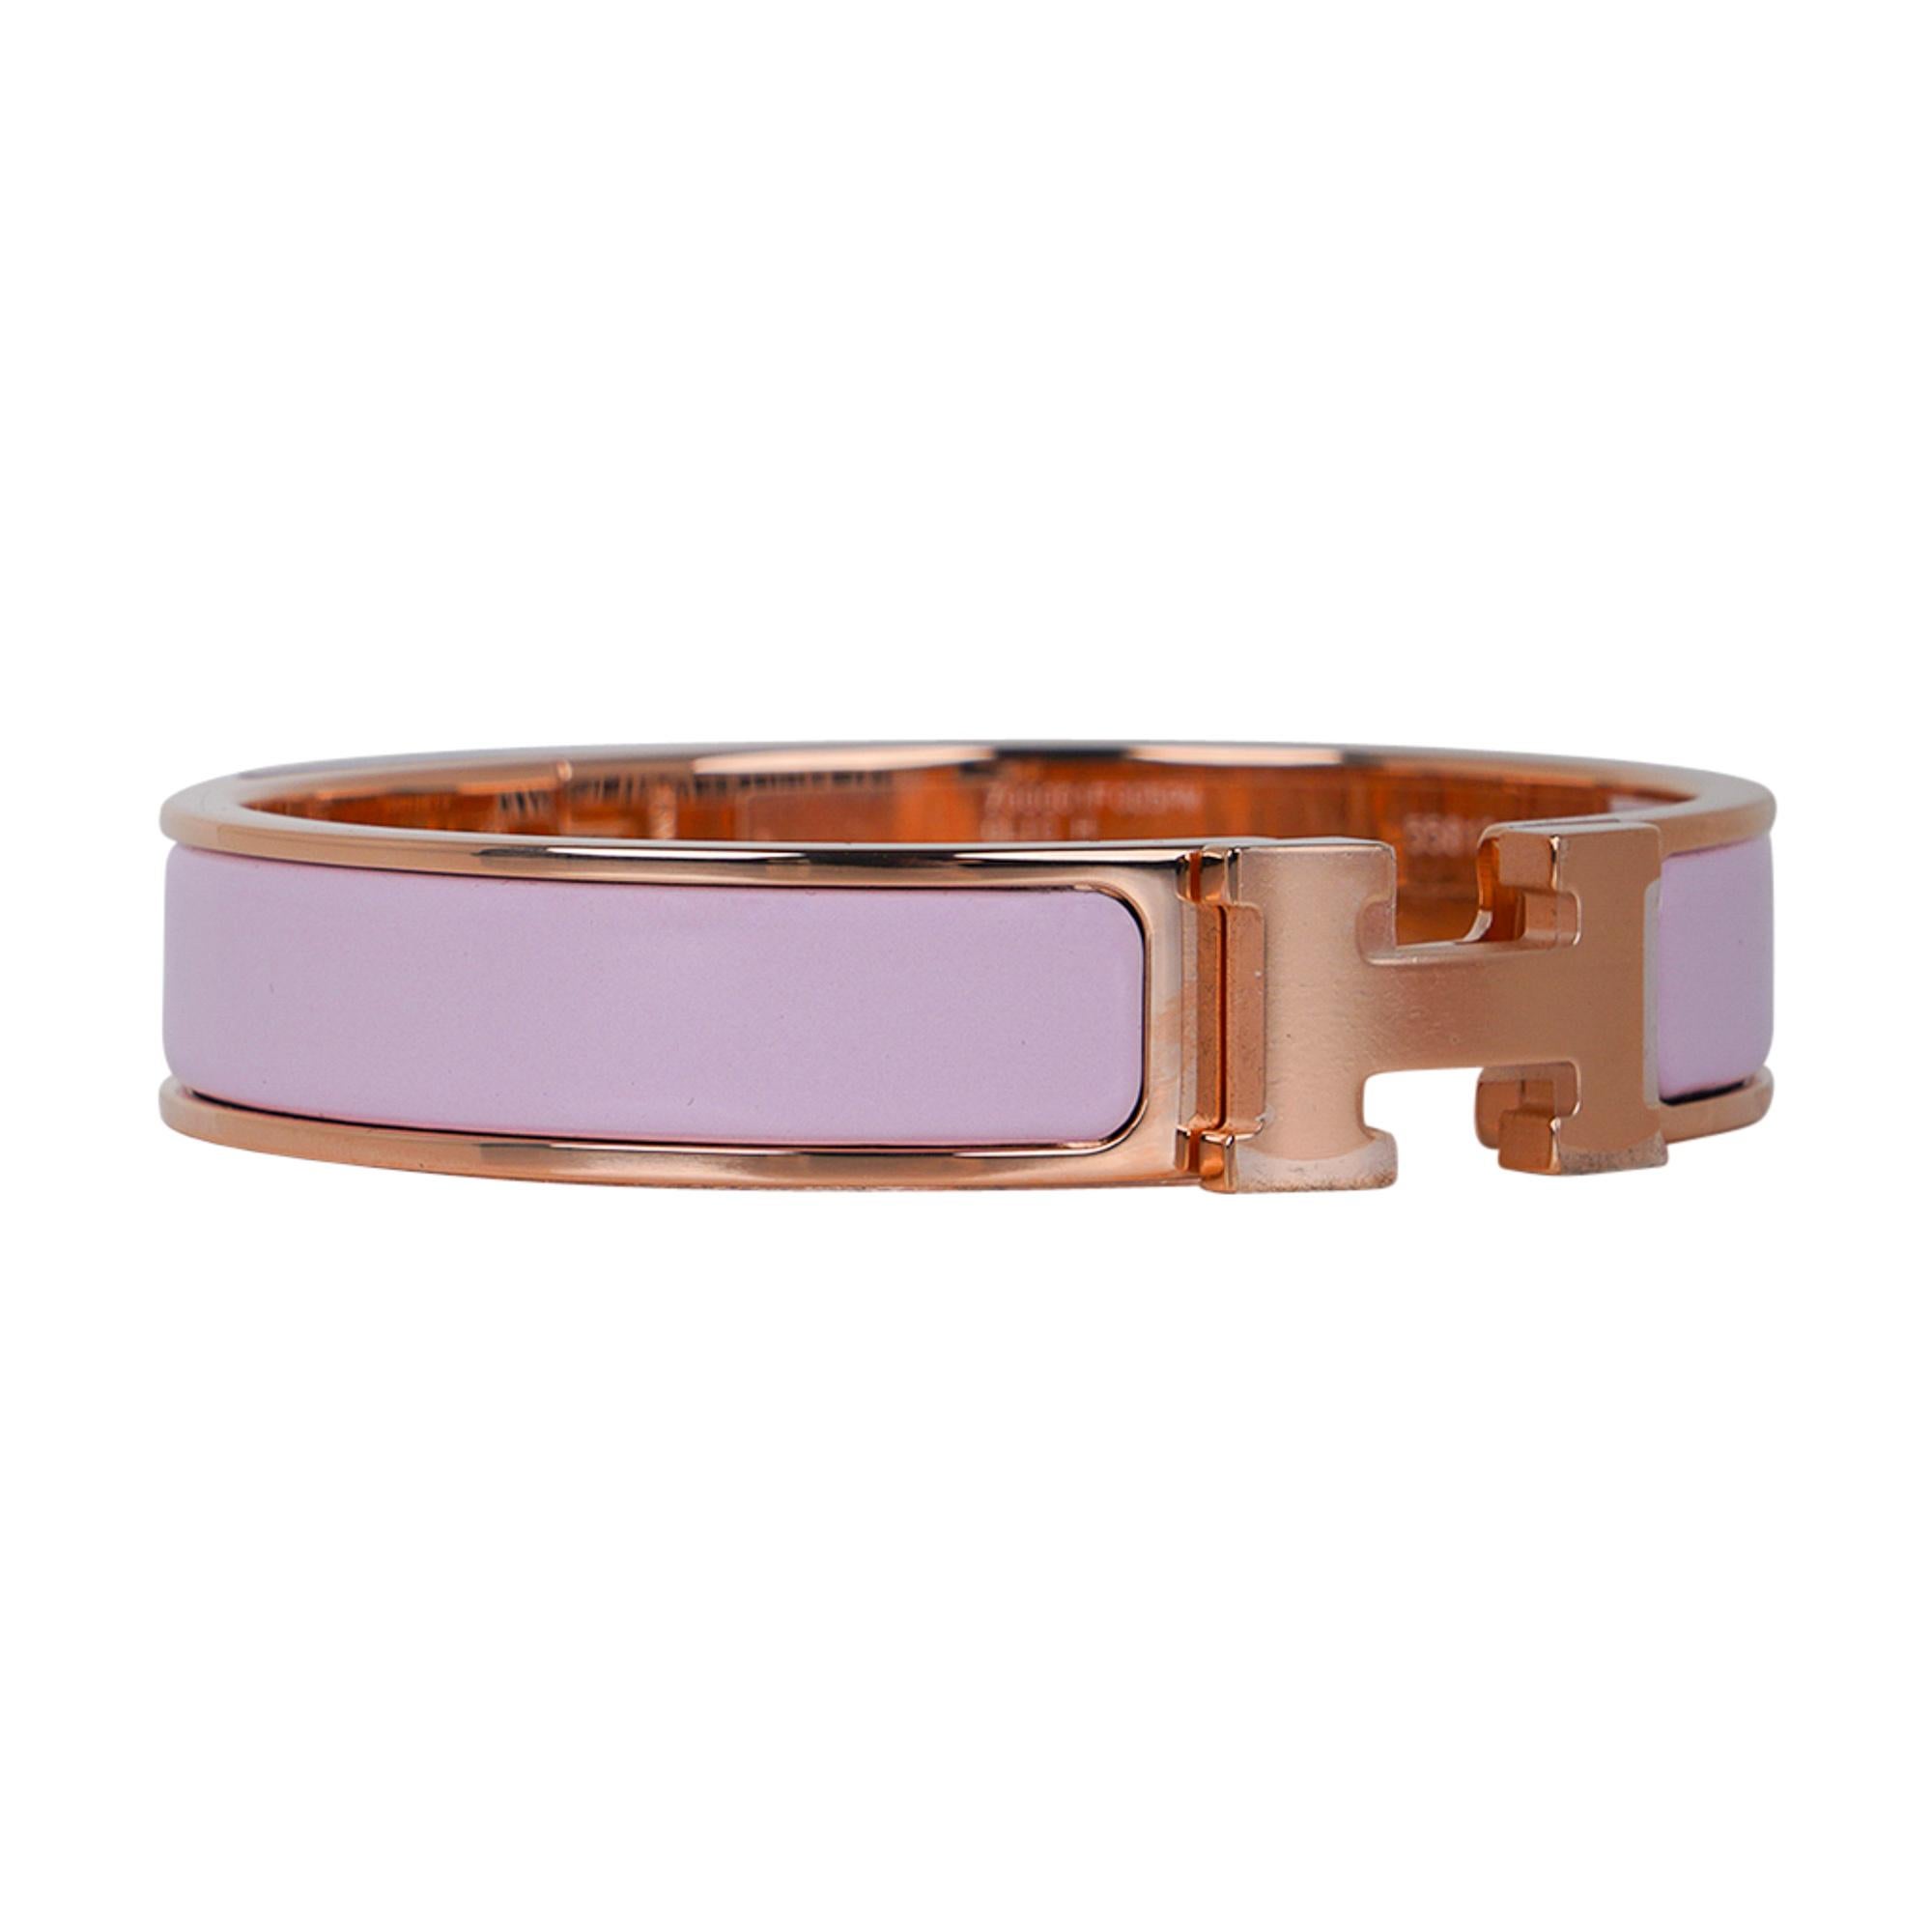 Mightychic offers an Hermes Clic H Bracelet featured in Rose Dragee Enamel.
Rose Gold plated.
Chic, modern and unmistakably Hermes!
A hinged band allows the H to swivel and open the bracelet.
Comes with pouch and signature Hermes box.
NEW or NEVER